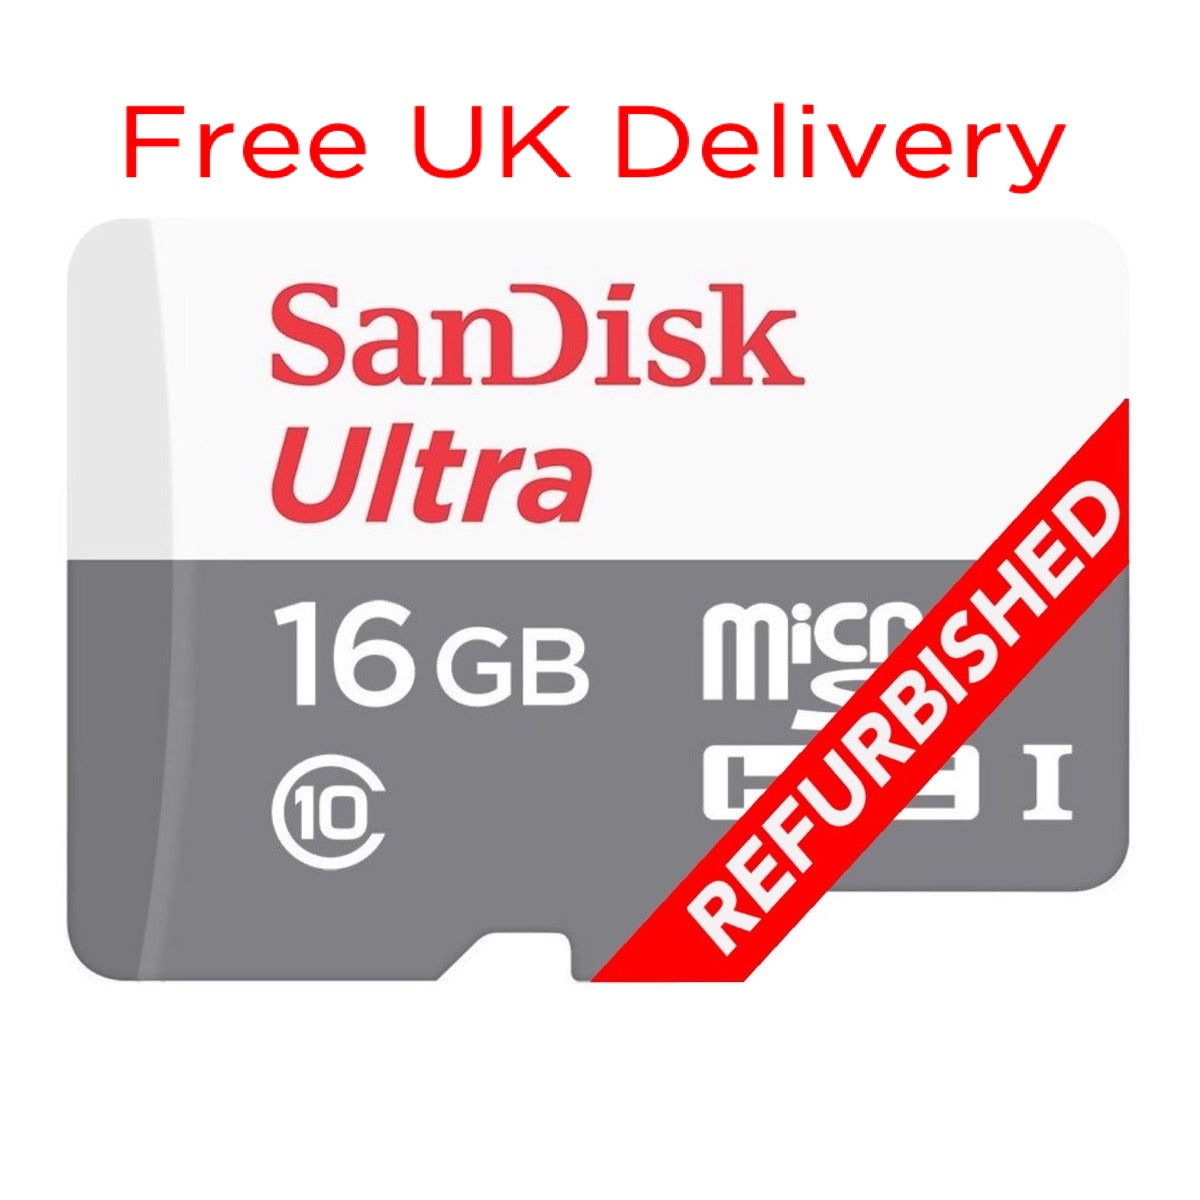 SanDisk 32GB Micro SD Card, for Mobile Phone, Size: MicroSD at Rs